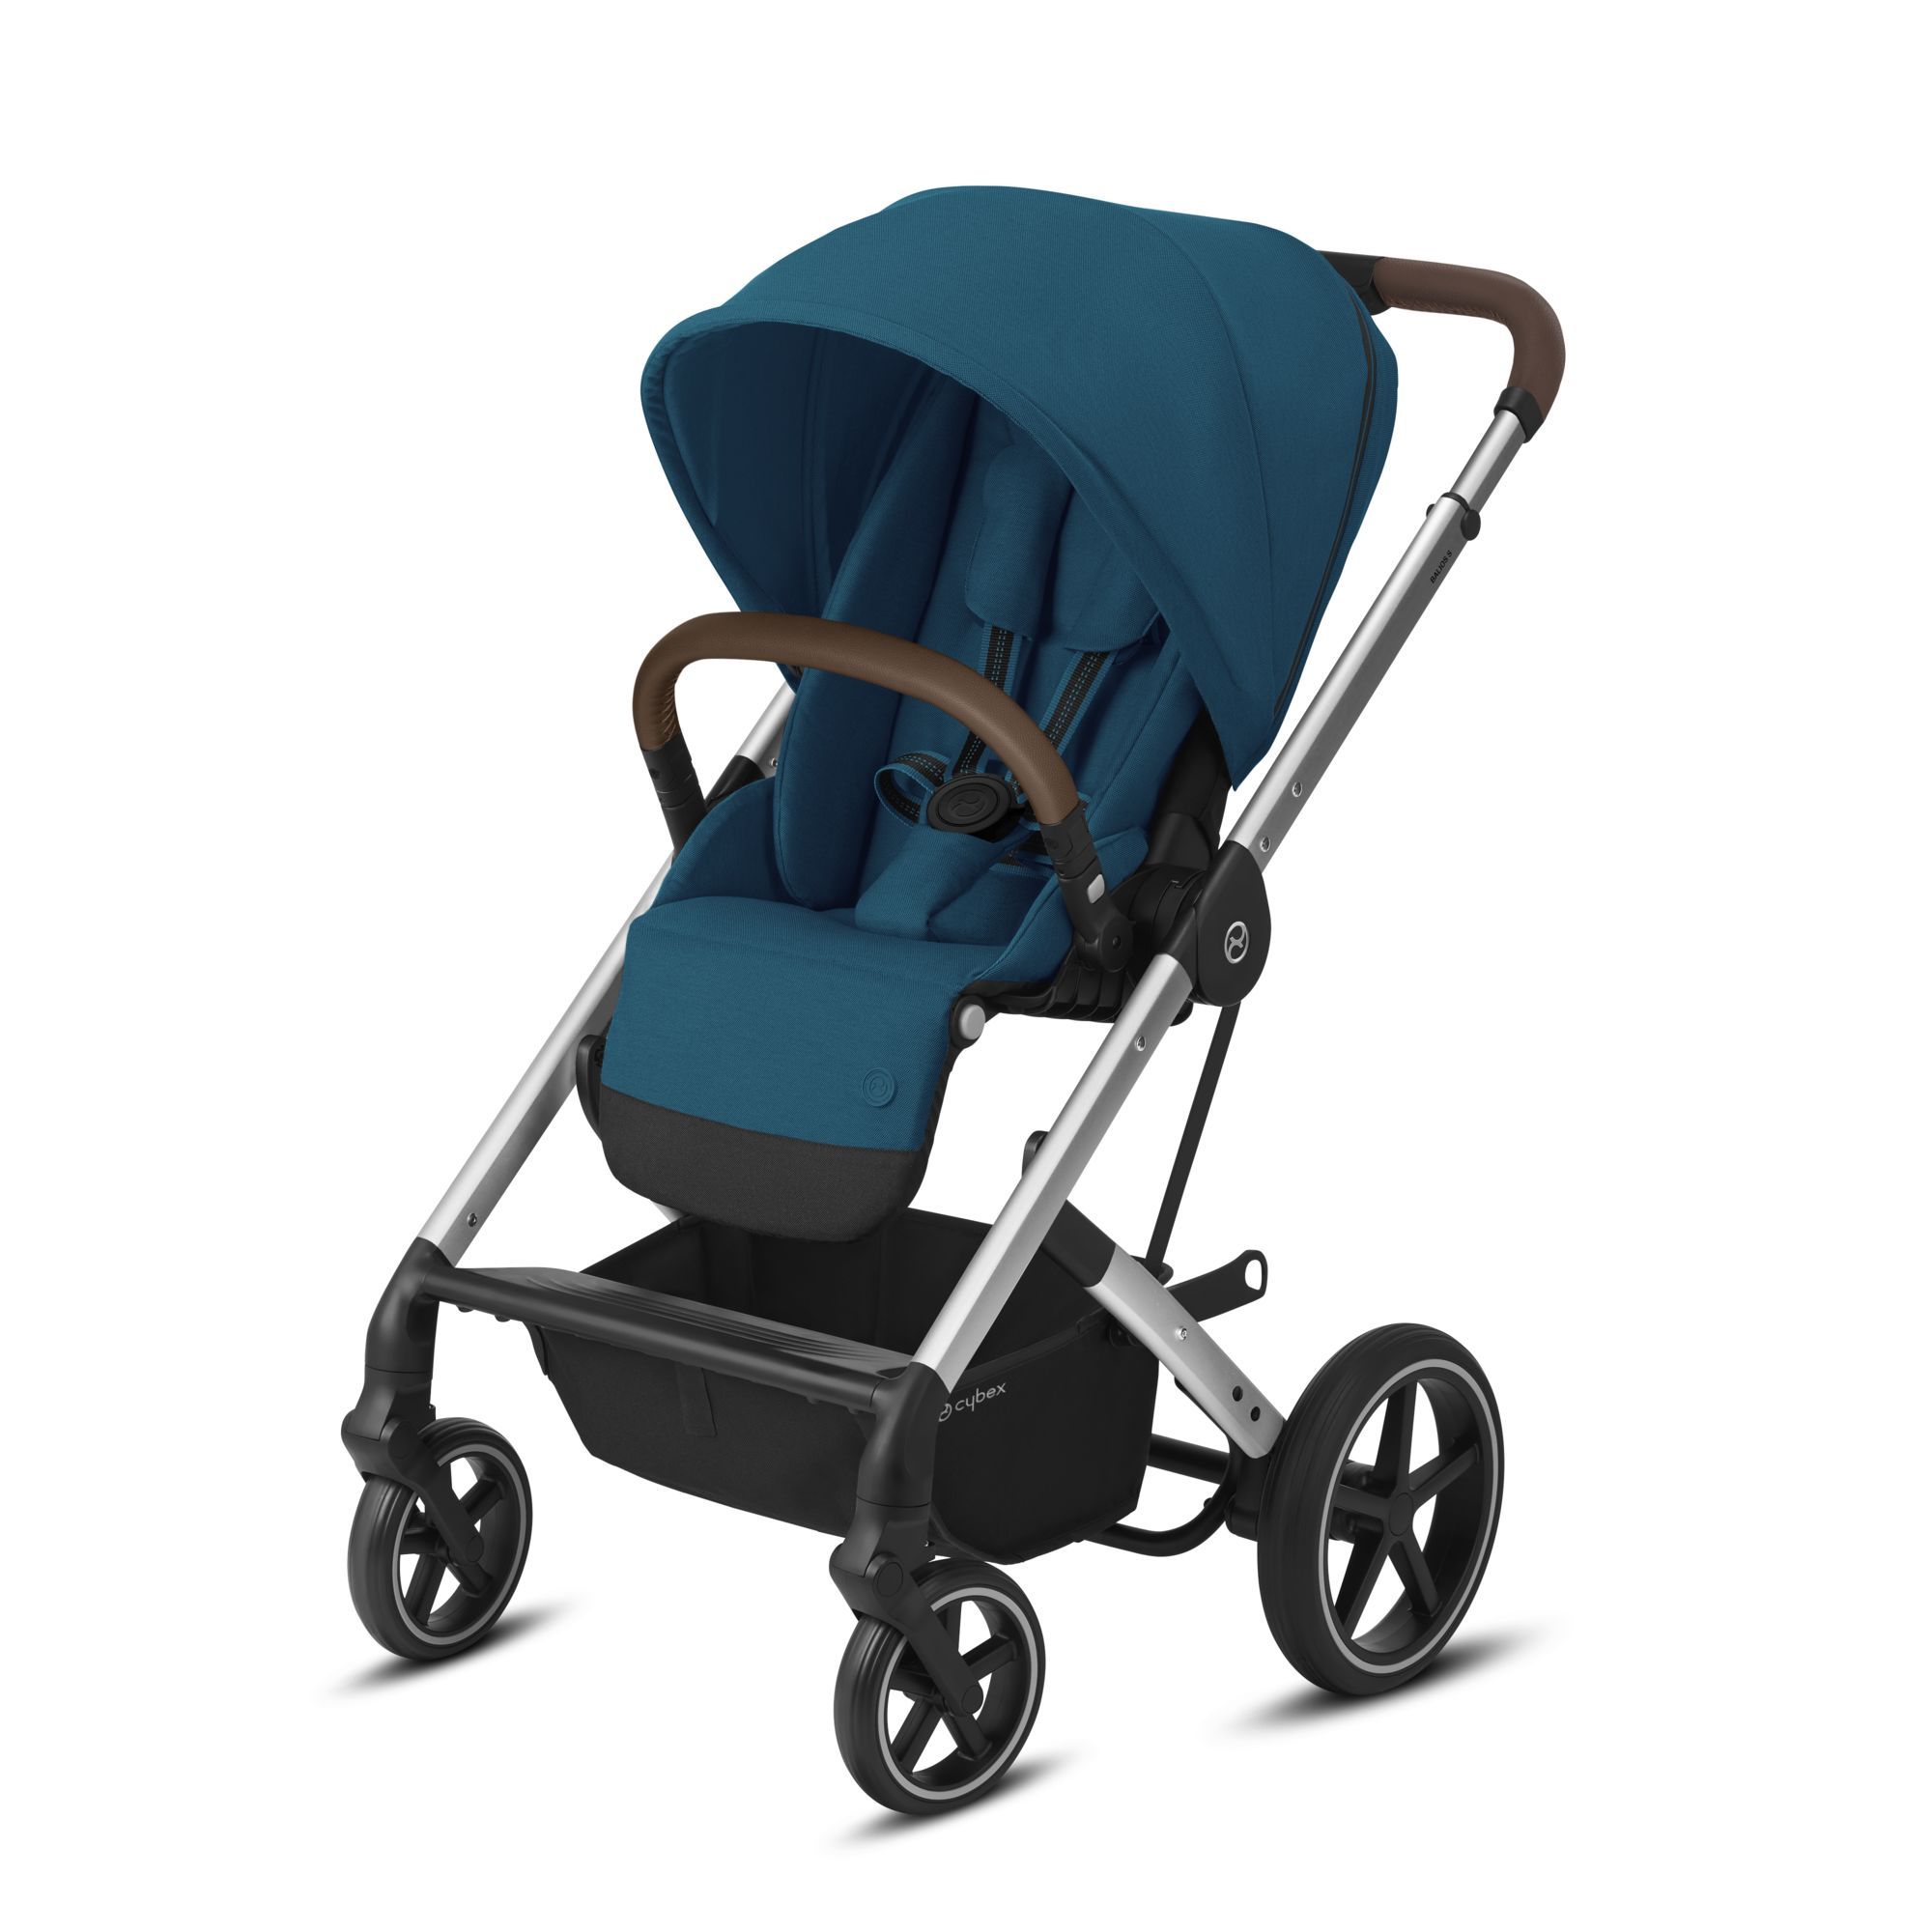 CYBEX Balios S Lux 2020 Stroller - ANB Baby -$300 - $500